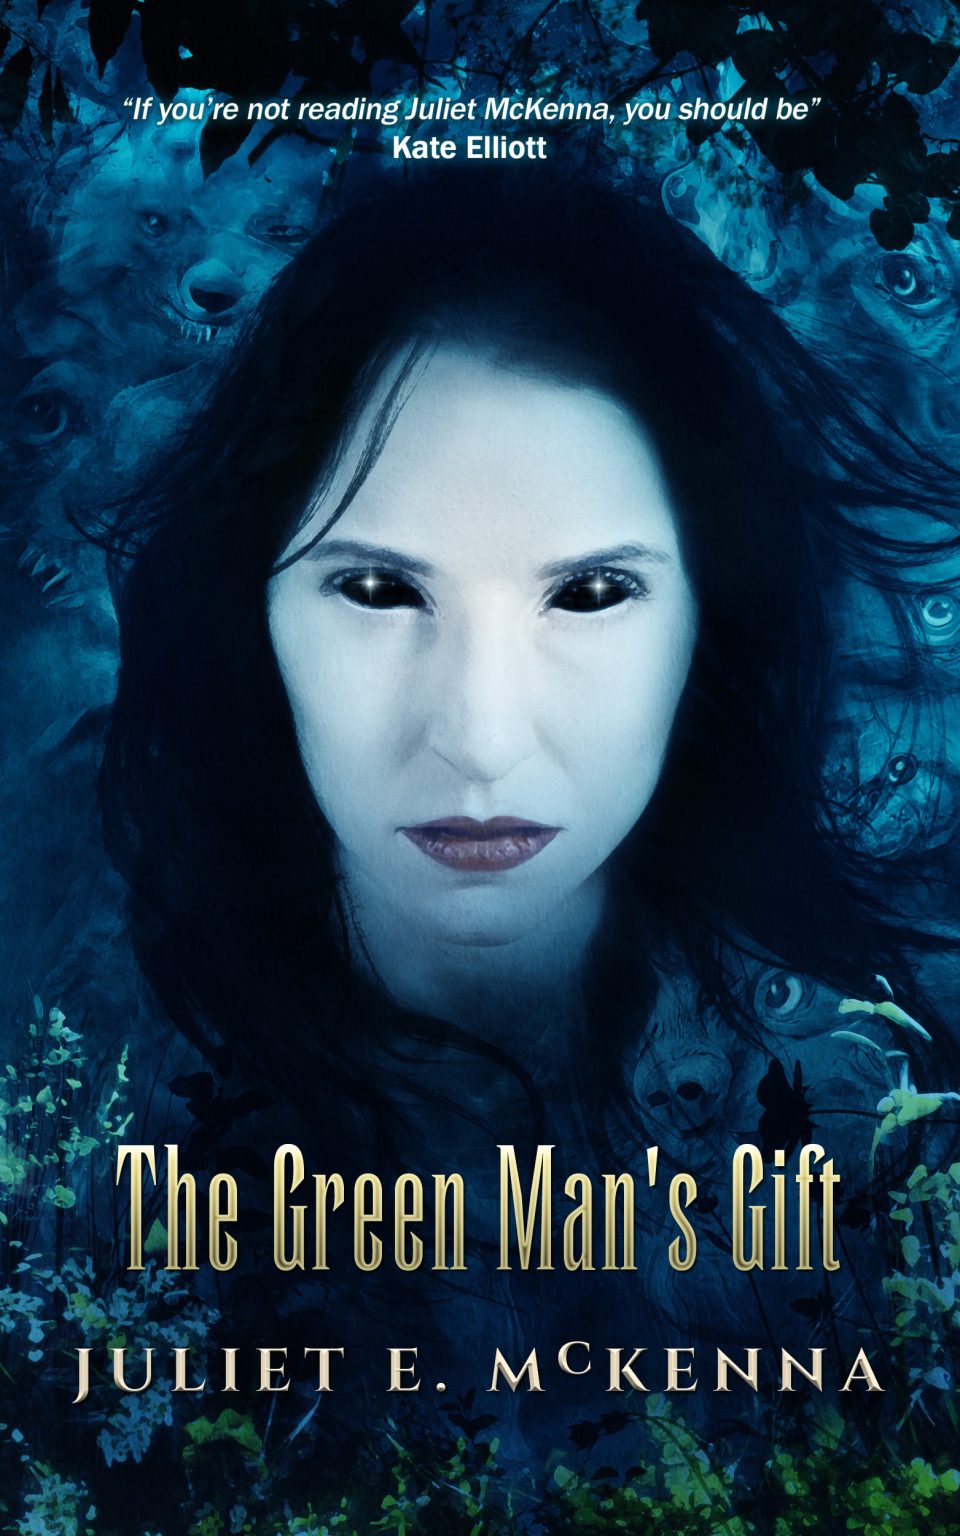 The Green Man's Gift book cover